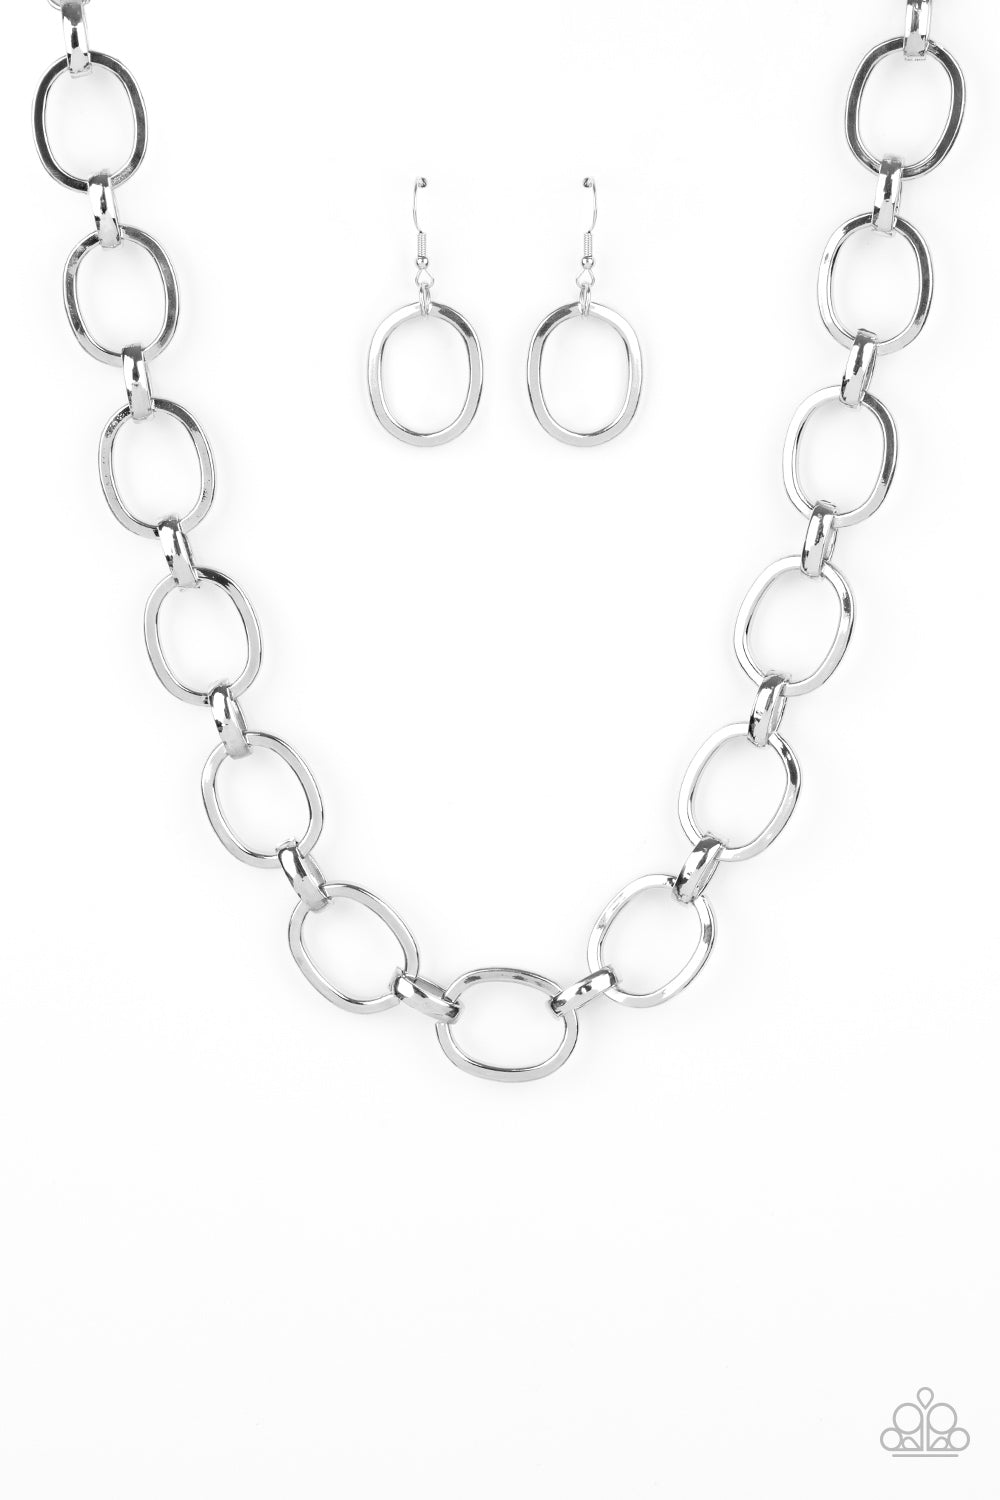 HAUTE-ly Contested - silver - Paparazzi necklace